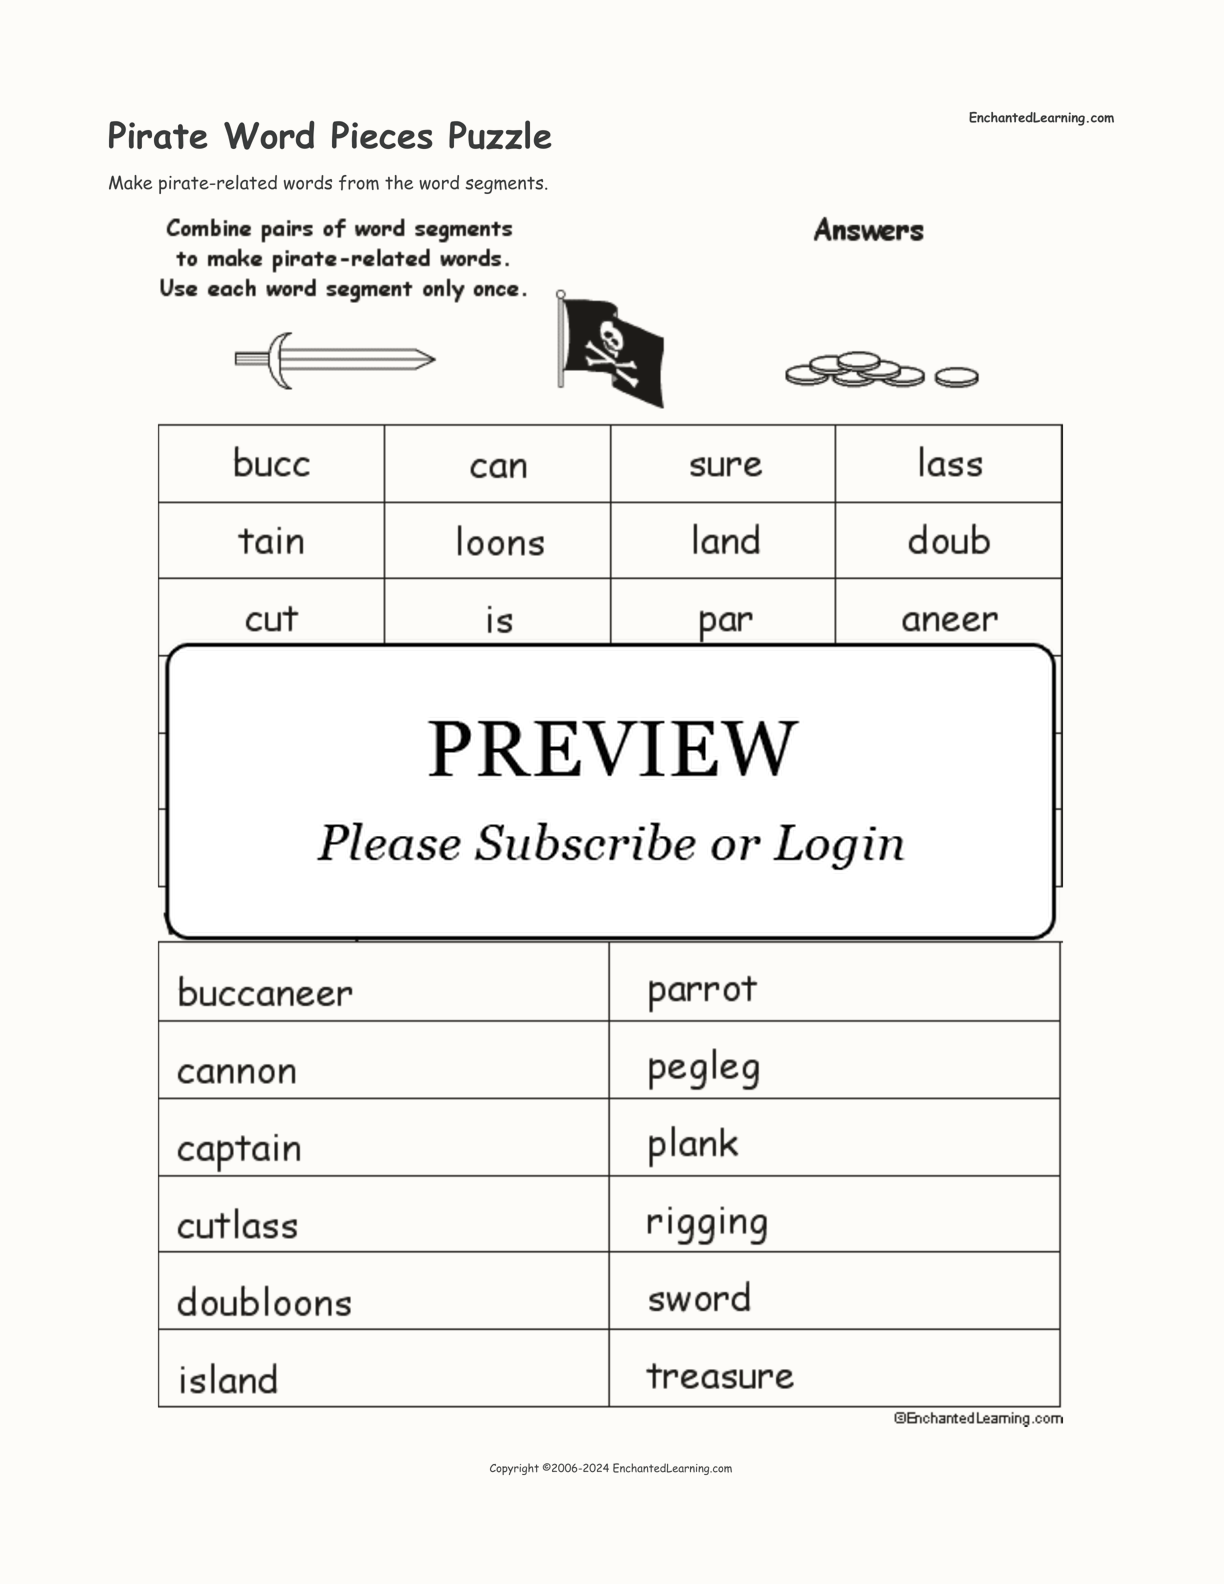 Pirate Word Pieces Puzzle interactive worksheet page 2